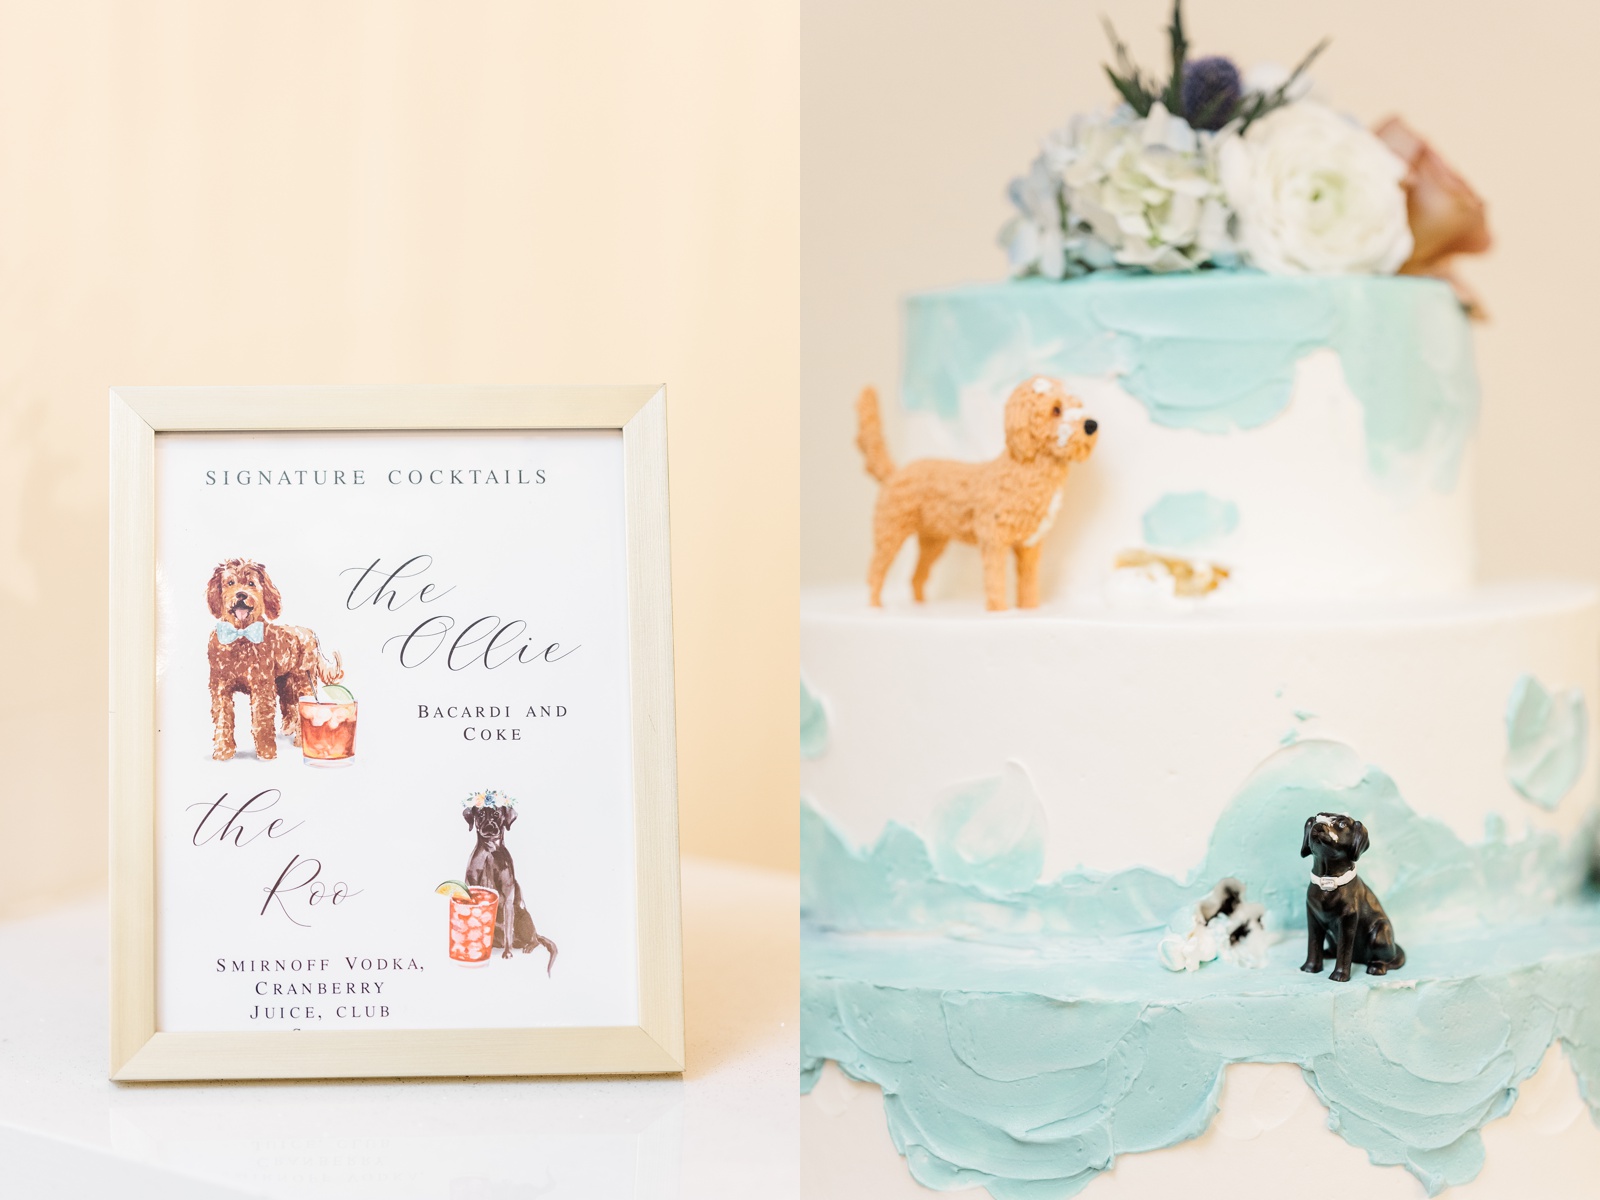 Cocktail sign and dog figurine on cake